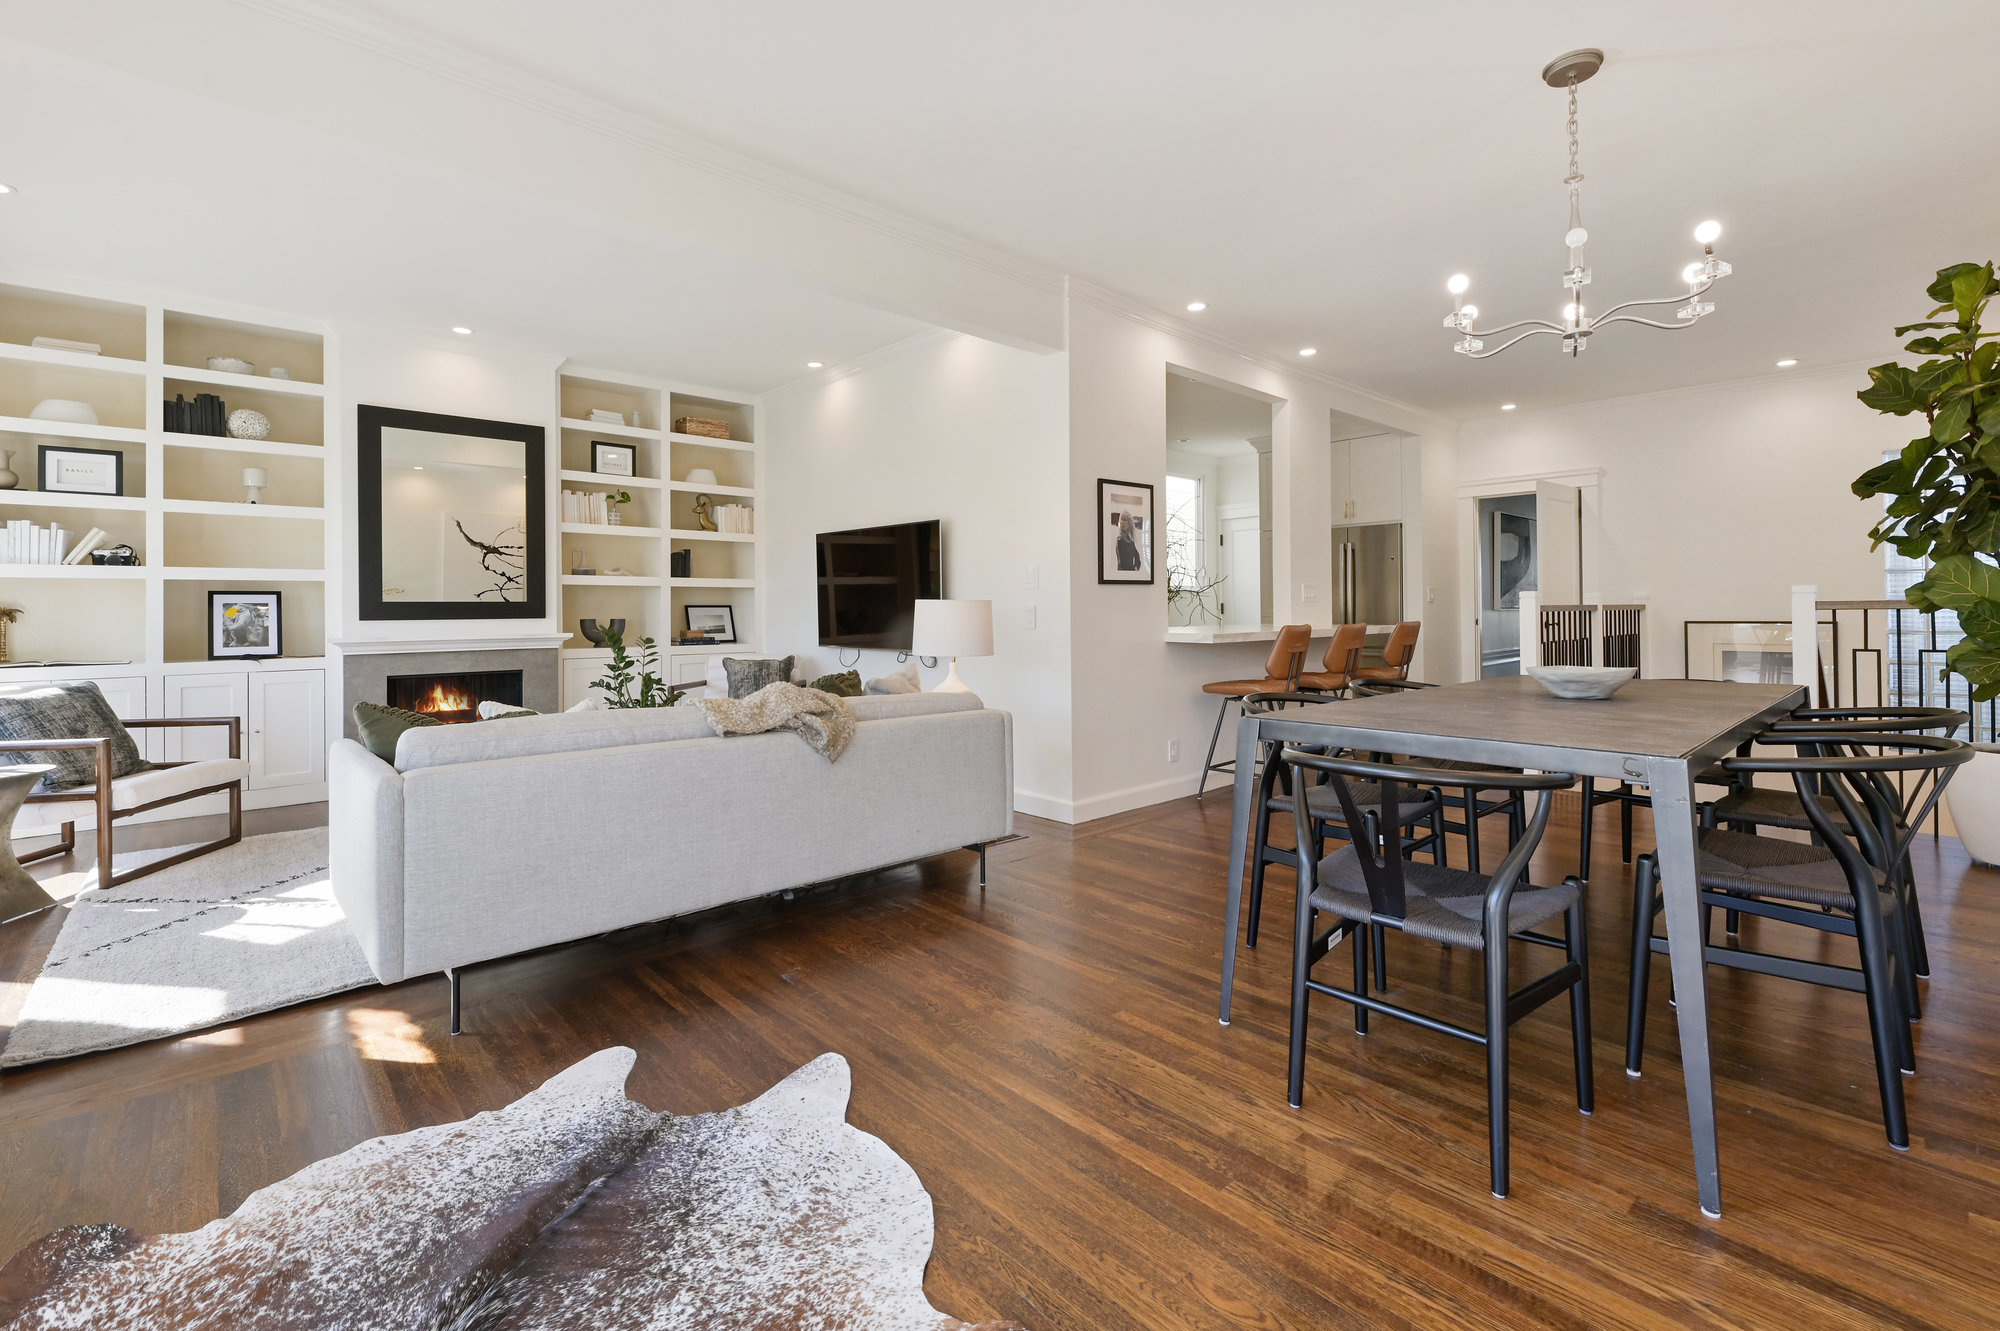 Property Photo: Open floor plan view of the living room and dining are